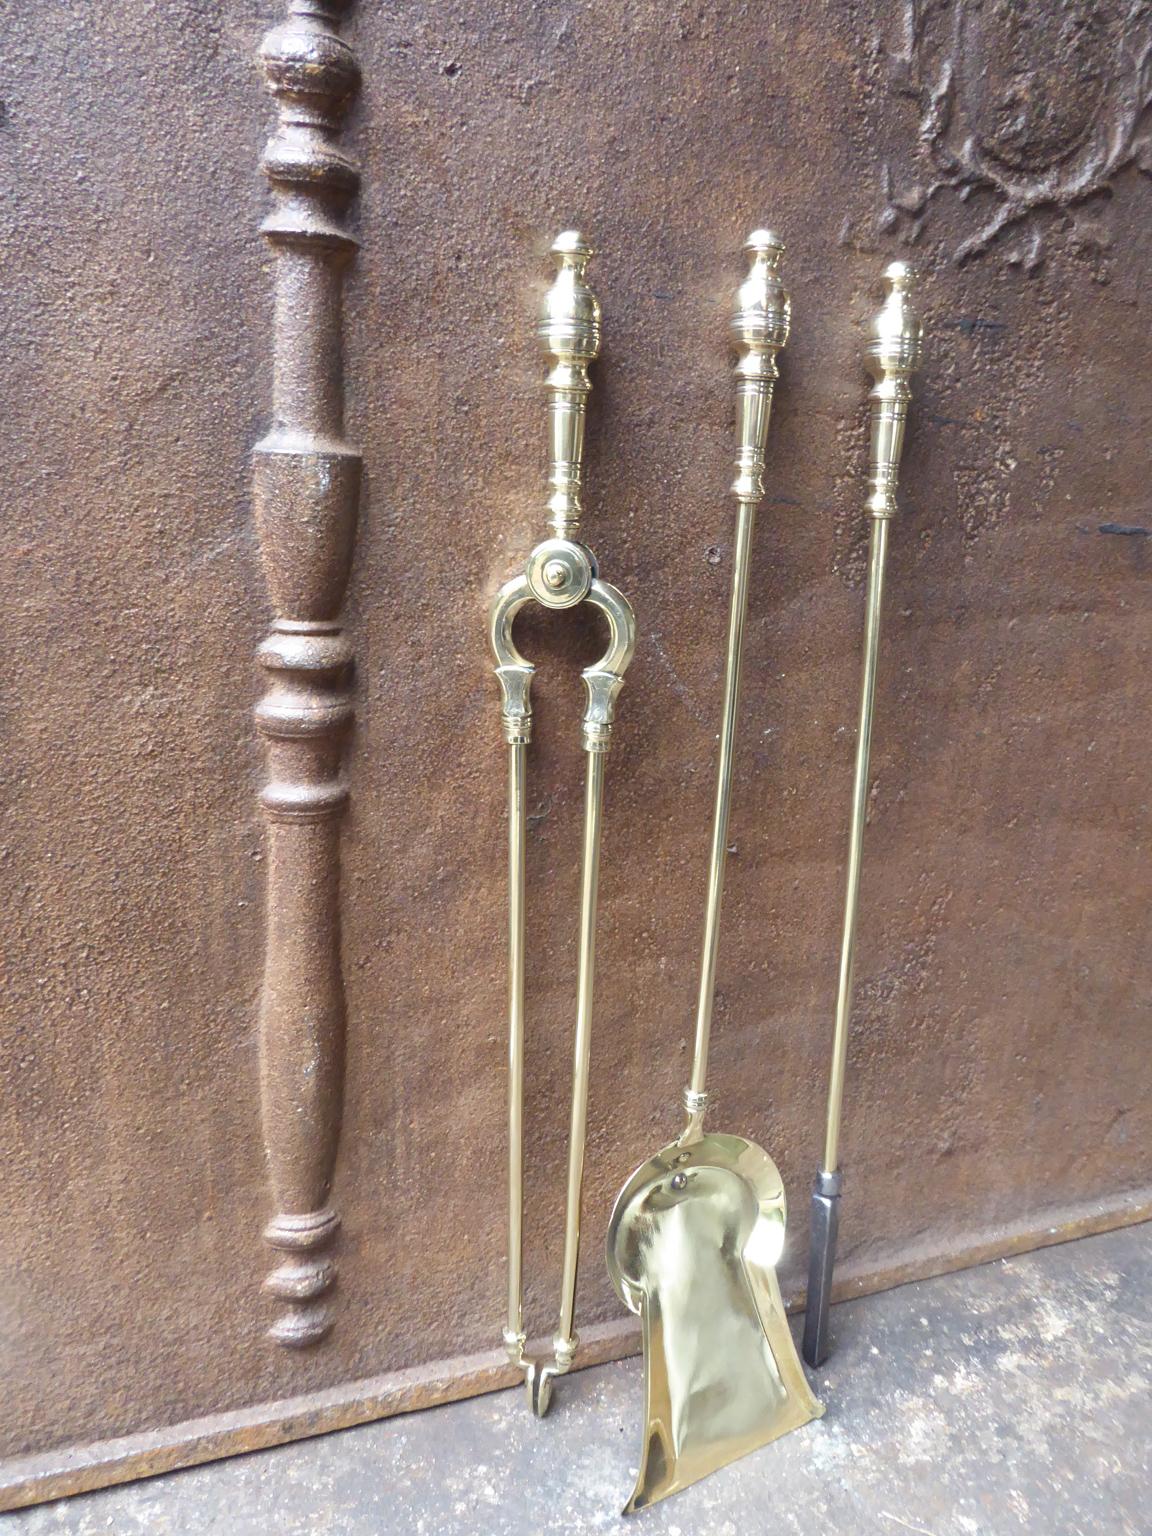 Early 20th century English Art Nouveau fireplace tool set made of polished brass. The fire irons are in a good condition and are fully functional.







 